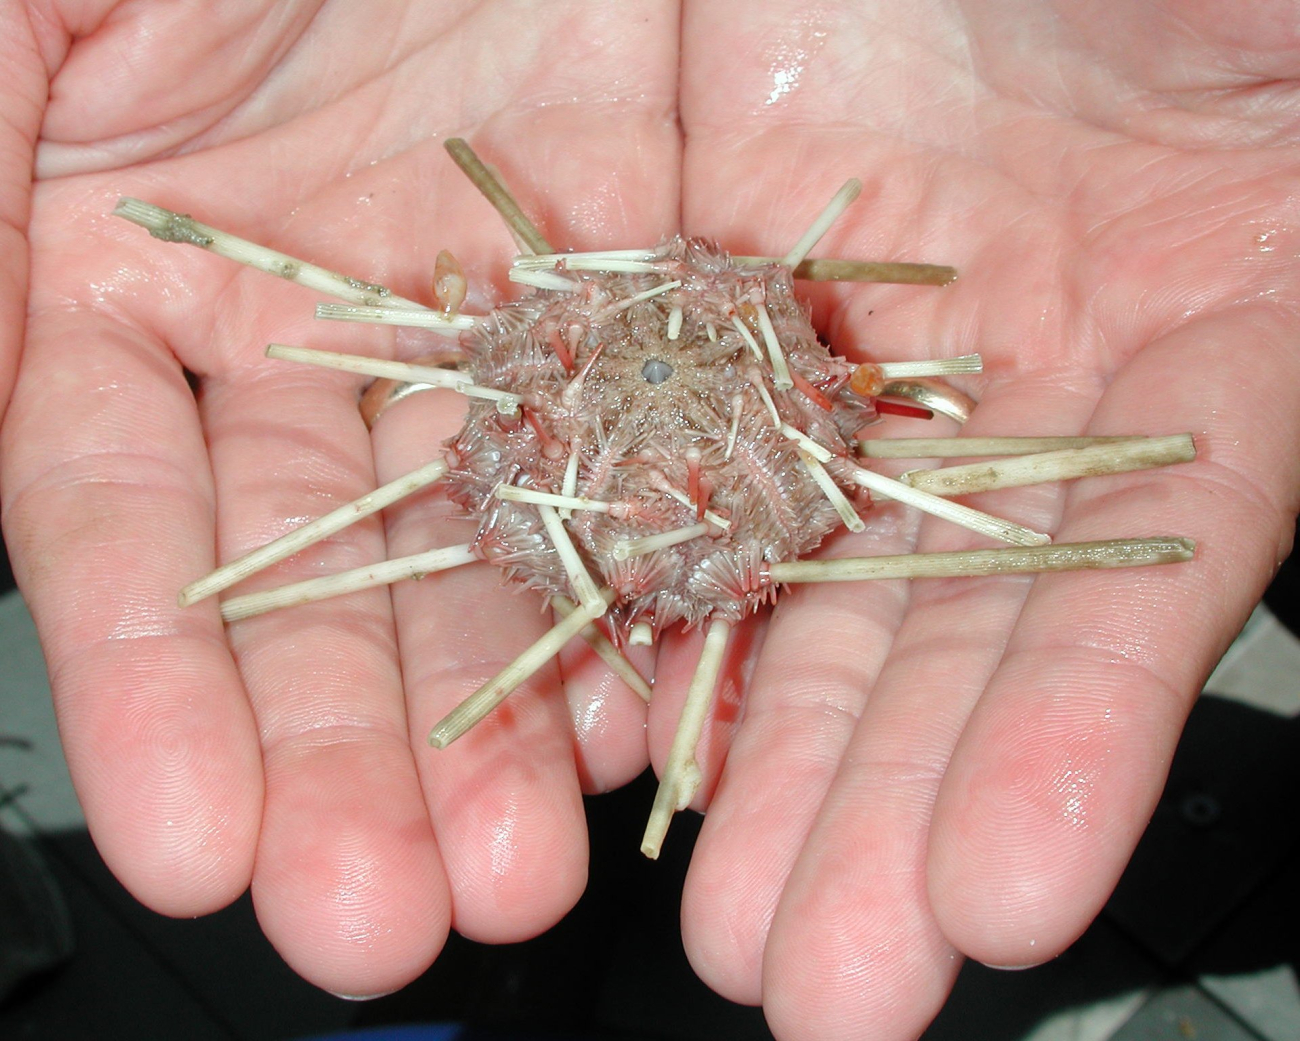 This pencil urchin was brought up from the deep ocean using an Otter trawl